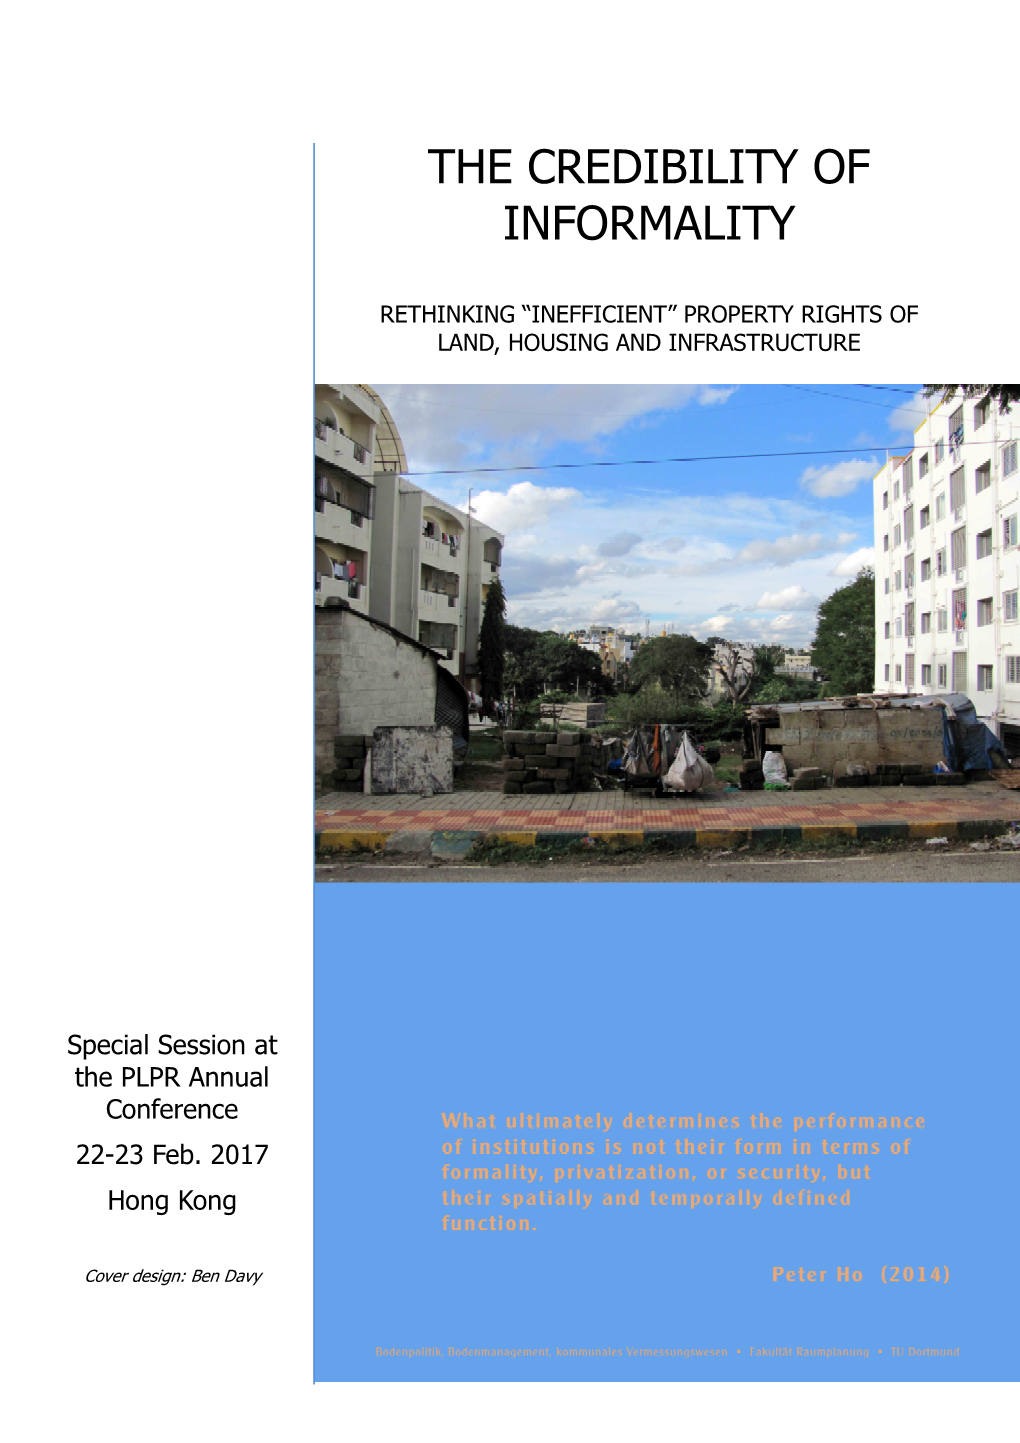 The Credibility of Informality